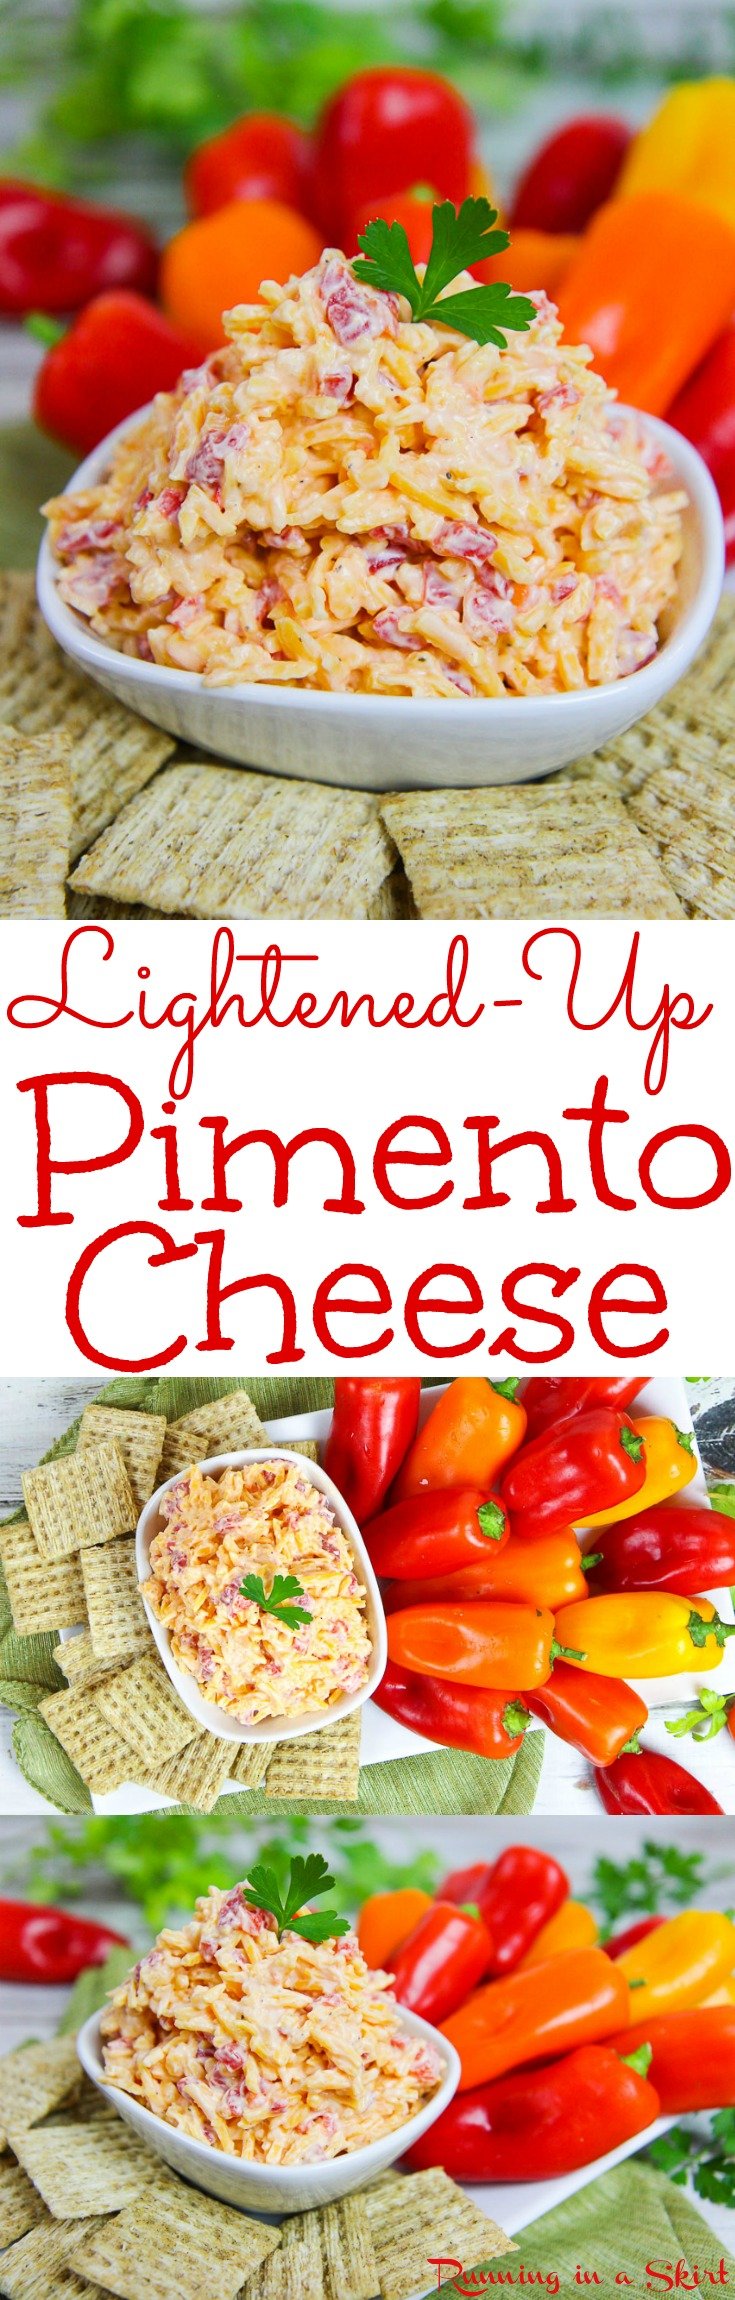 The Best Lightened-Up Homemade Southern Pimento Cheese recipe. A healthier, easy version of this spread or dip. Serve in a sandwich, on crackers or at a party! Uses greek yogurt and includes a no mayo version. / Running in a Skirt via @juliewunder